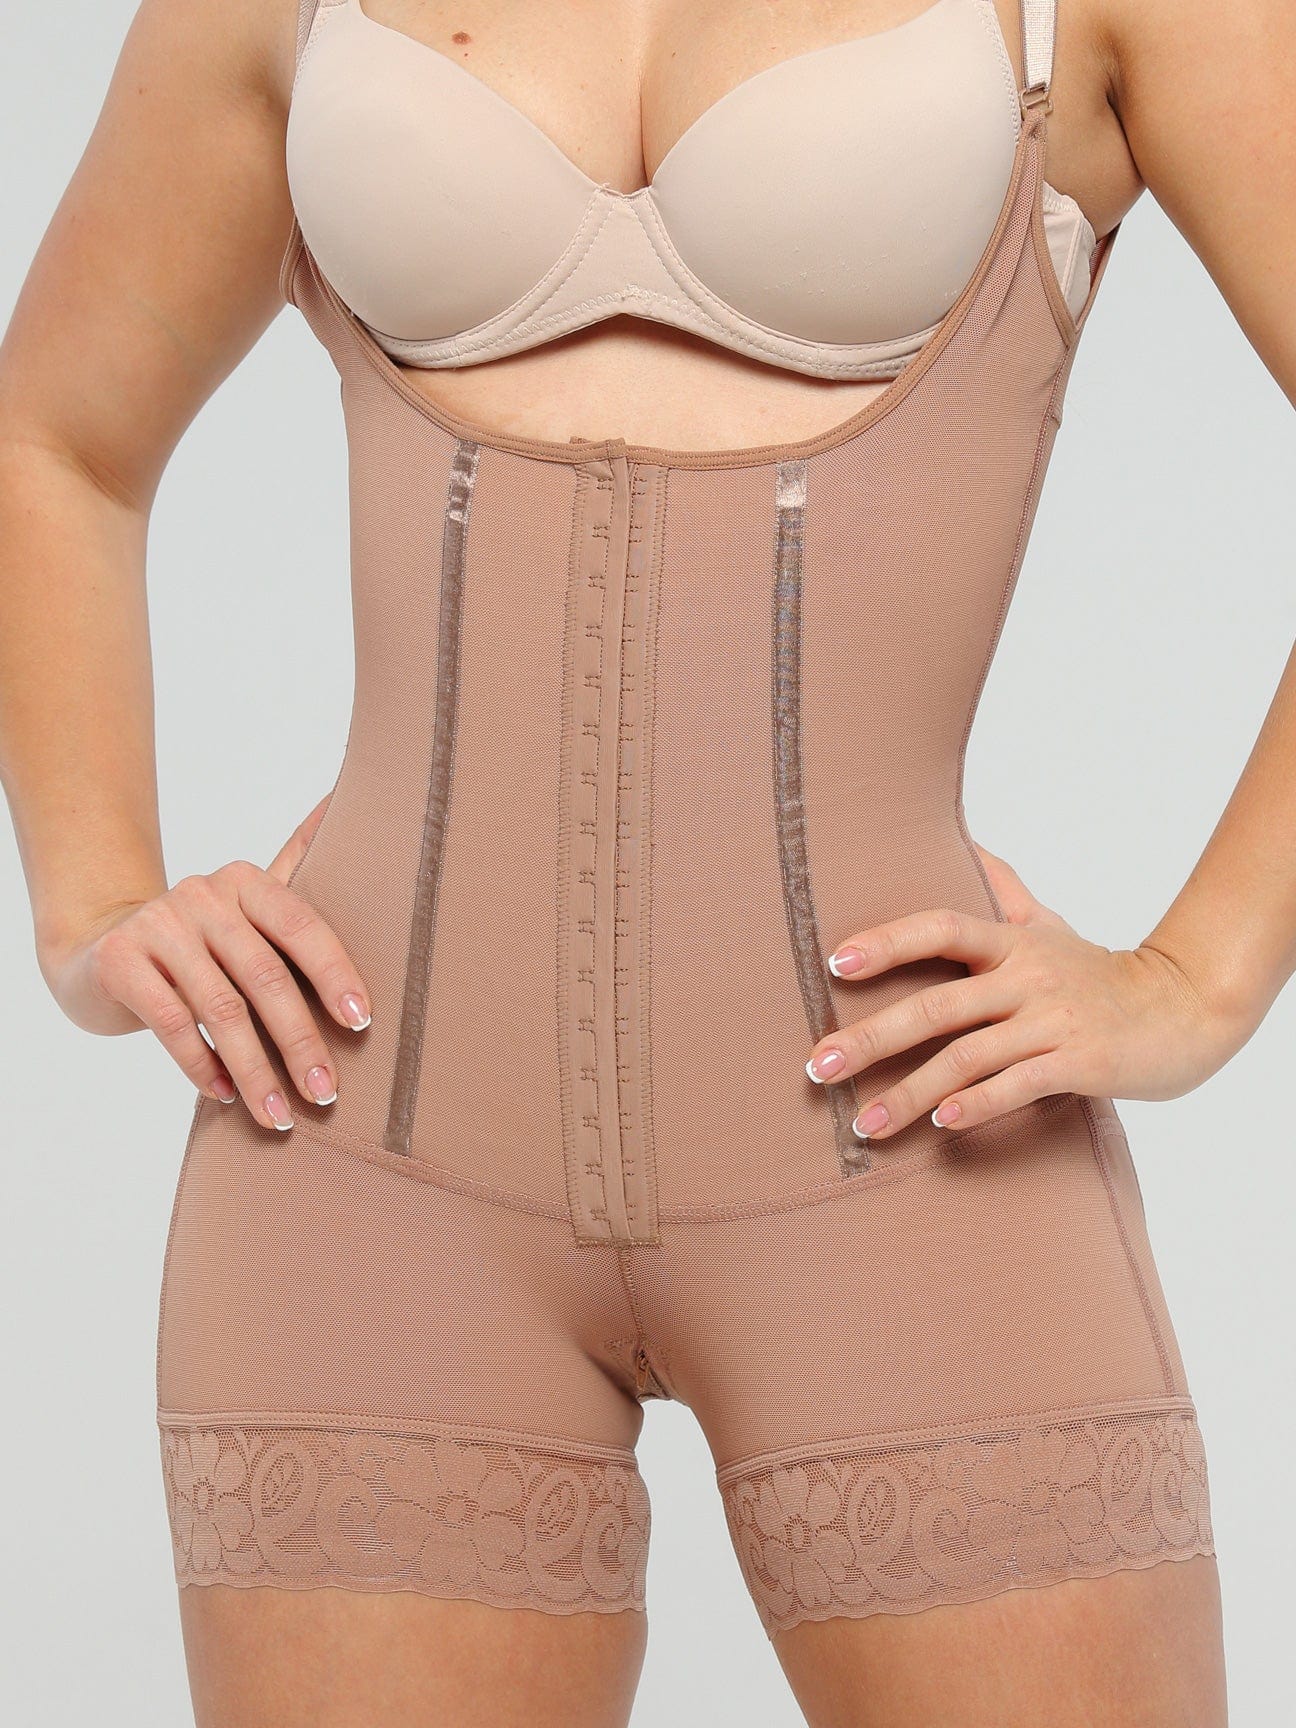 Double Fixed Waist Trainer Patchwork Hourglass Body Shapewear